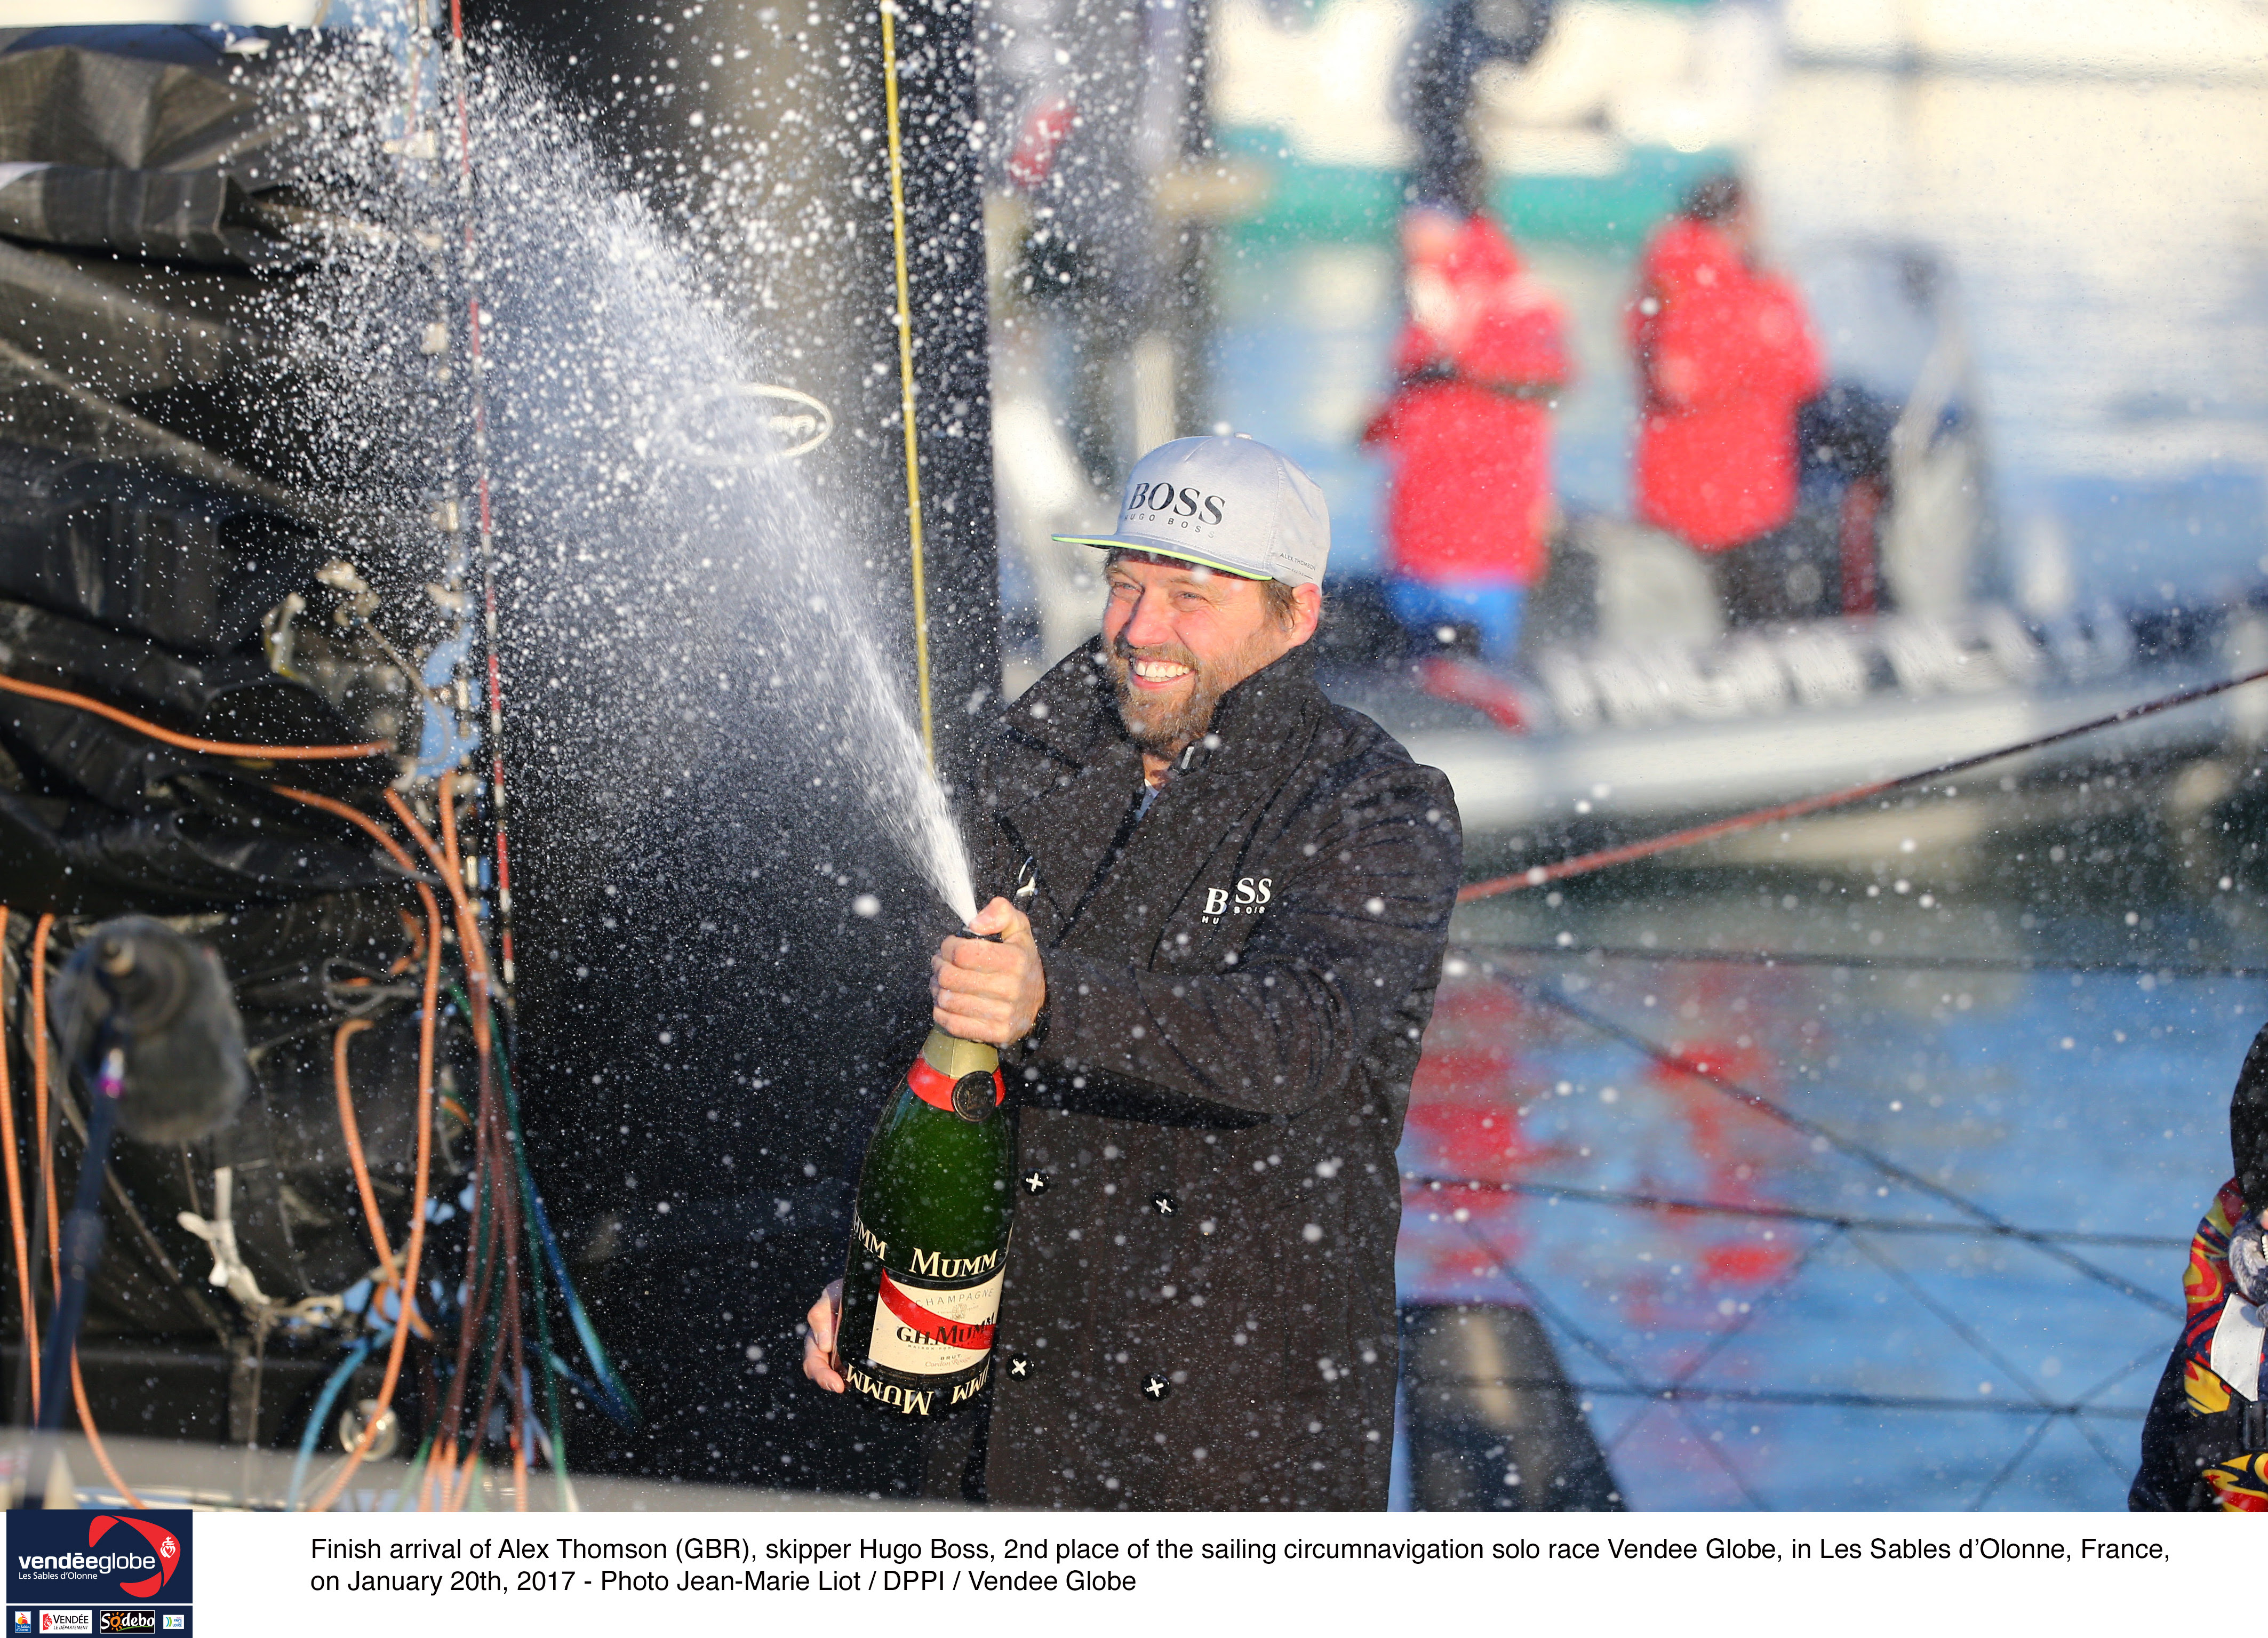 Finish arrival of Alex Thomson (GBR), skipper Hugo Boss, 2nd place of the sailing circumnavigation solo race Vendee Globe, in Les Sables d'Olonne, France on January 20th, 2017 - Photo Jean-Marie Liot / DPPI / Vendee Globe